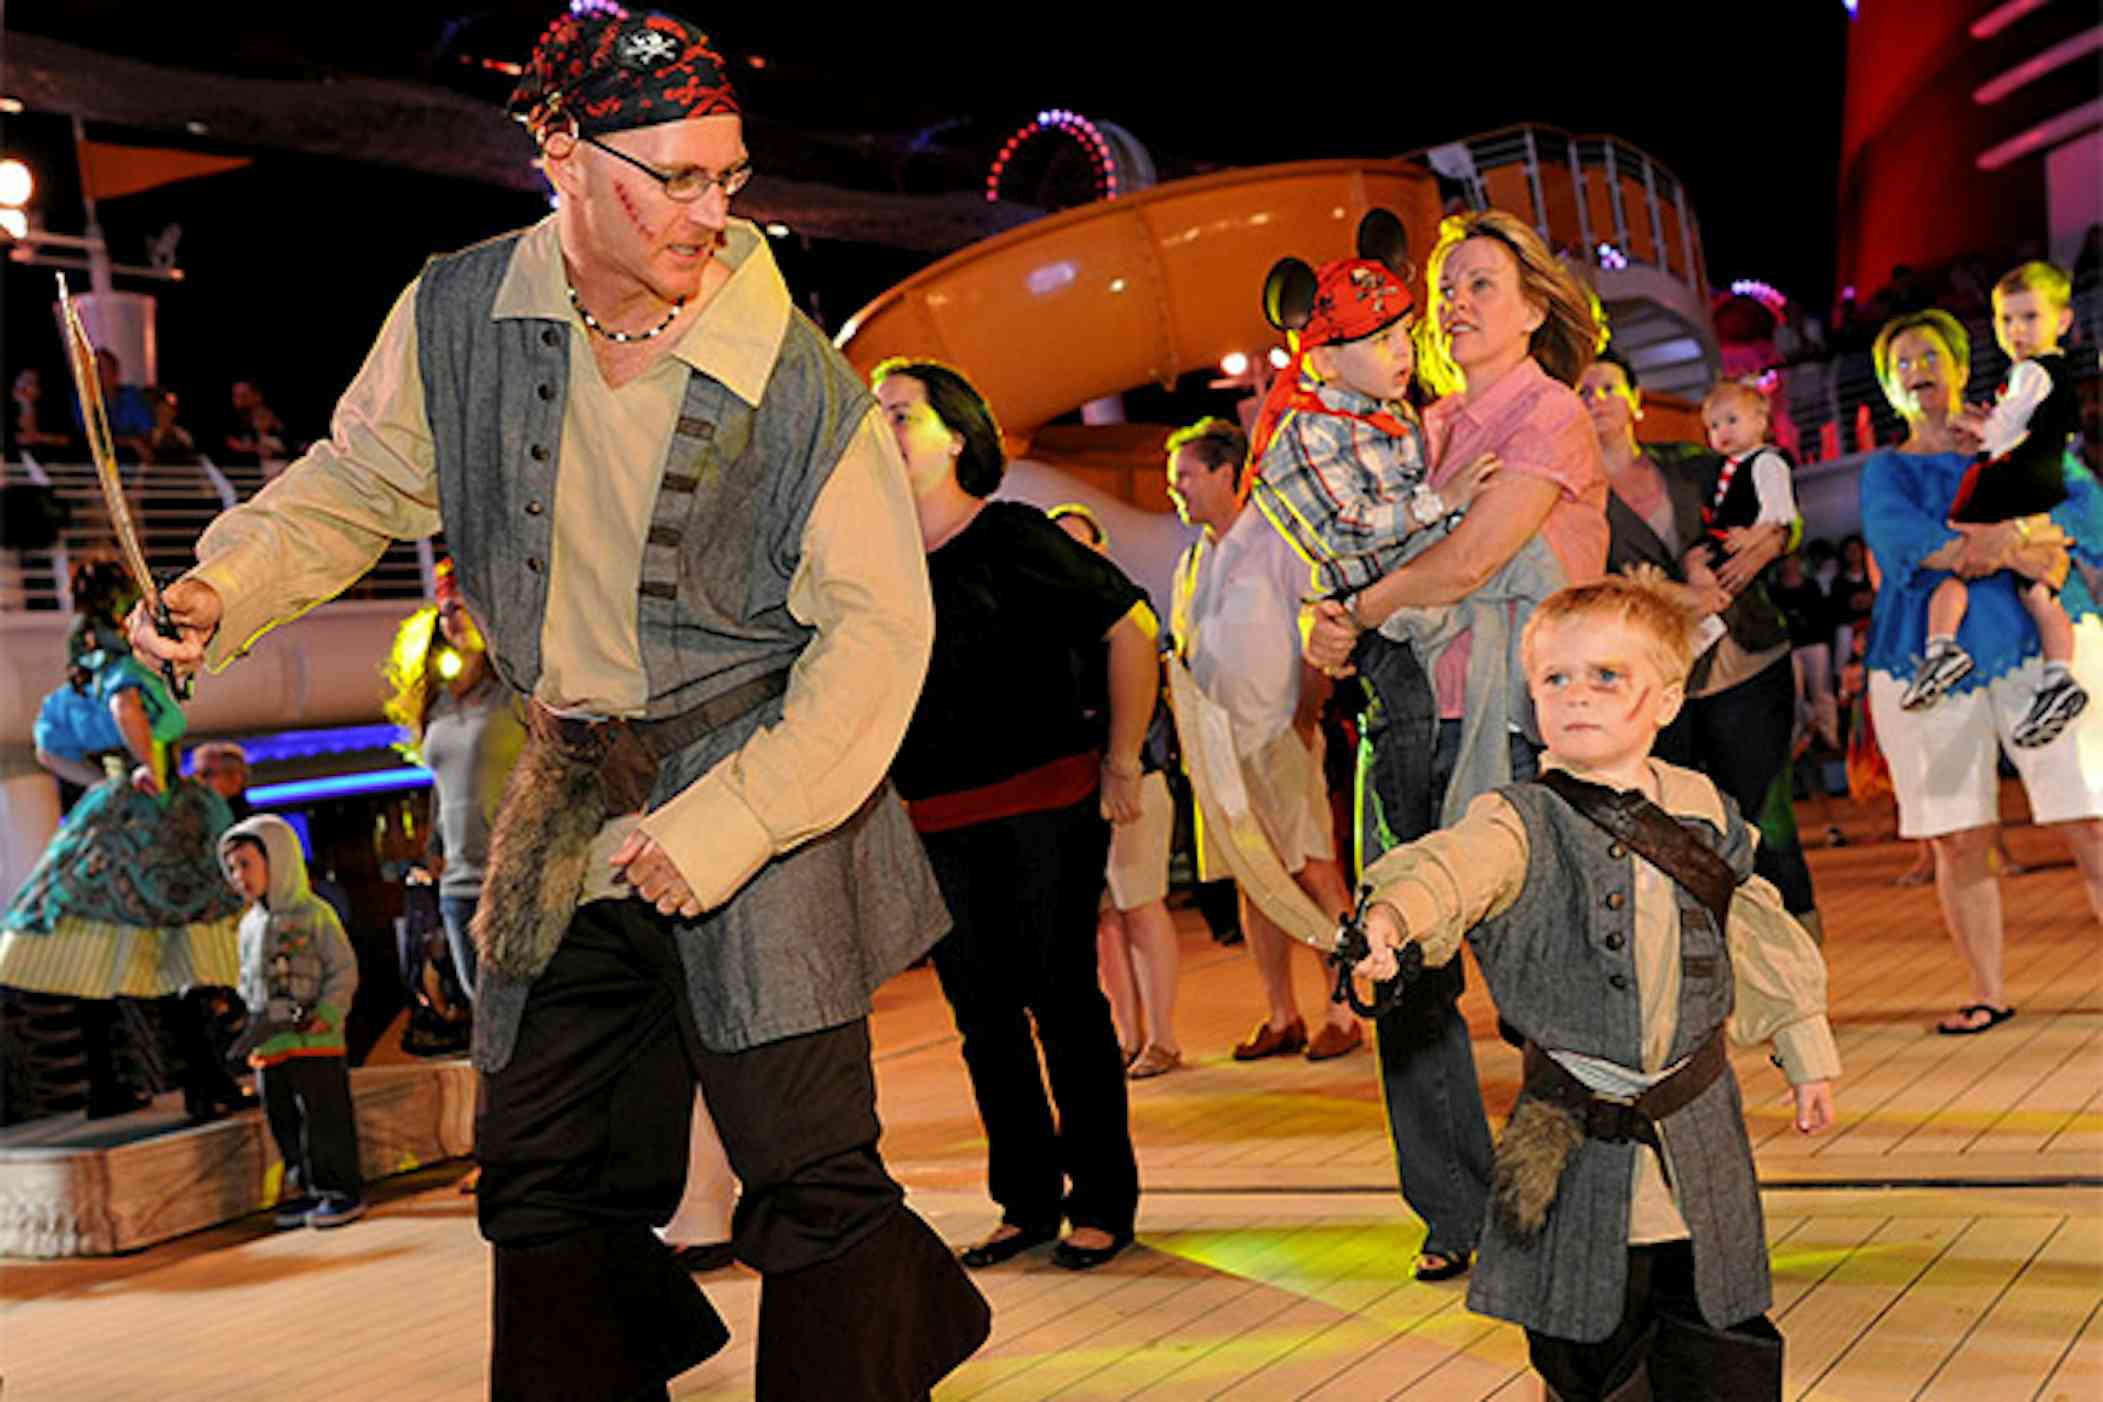 Best Tips for Pirate Night on a Disney Cruise - Mama Cheaps®